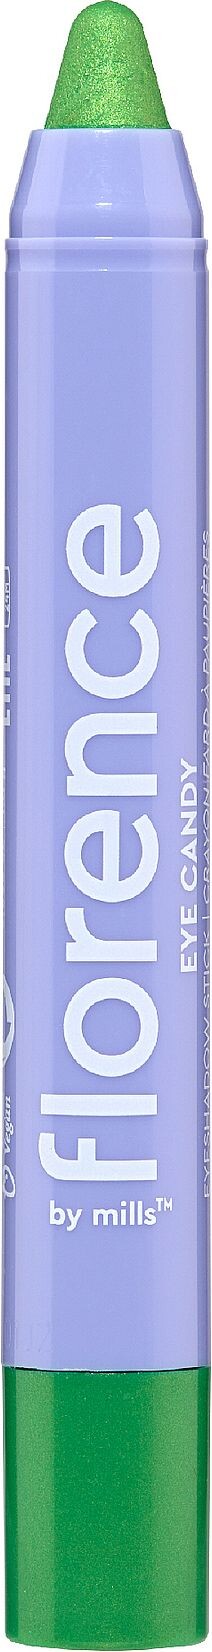 Se Florence By Mills - Eye Candy Eyeshadow Stick - Sour Apple hos Gucca.dk